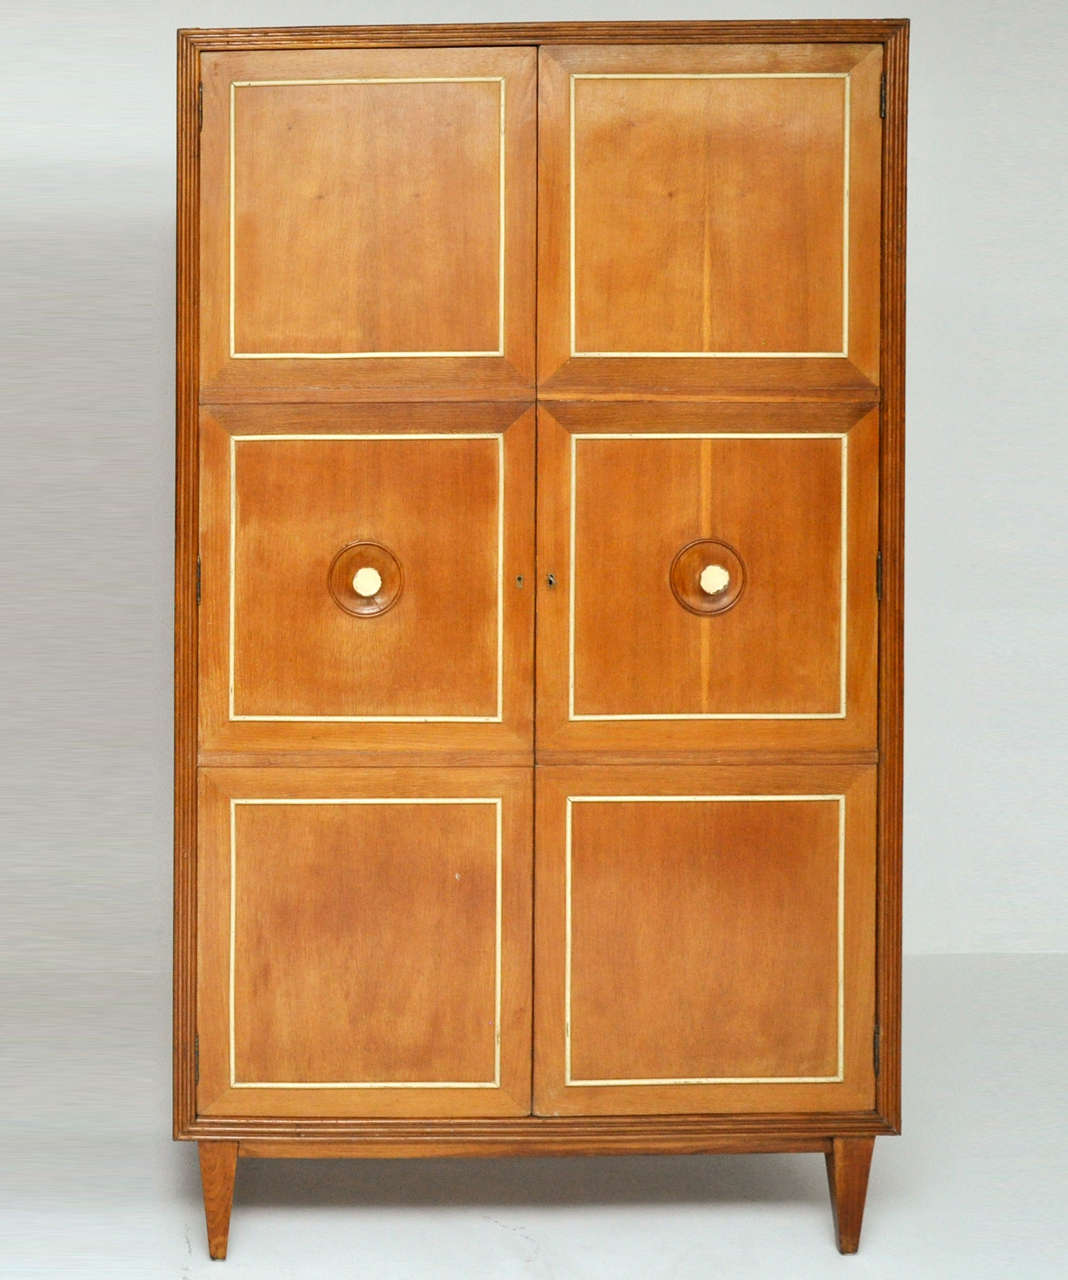  1950's wardrobe cabinet. Made in Italy. 

**A second cabinet made to accompany this cabinet is also available, as well as matching pair of nightstands.